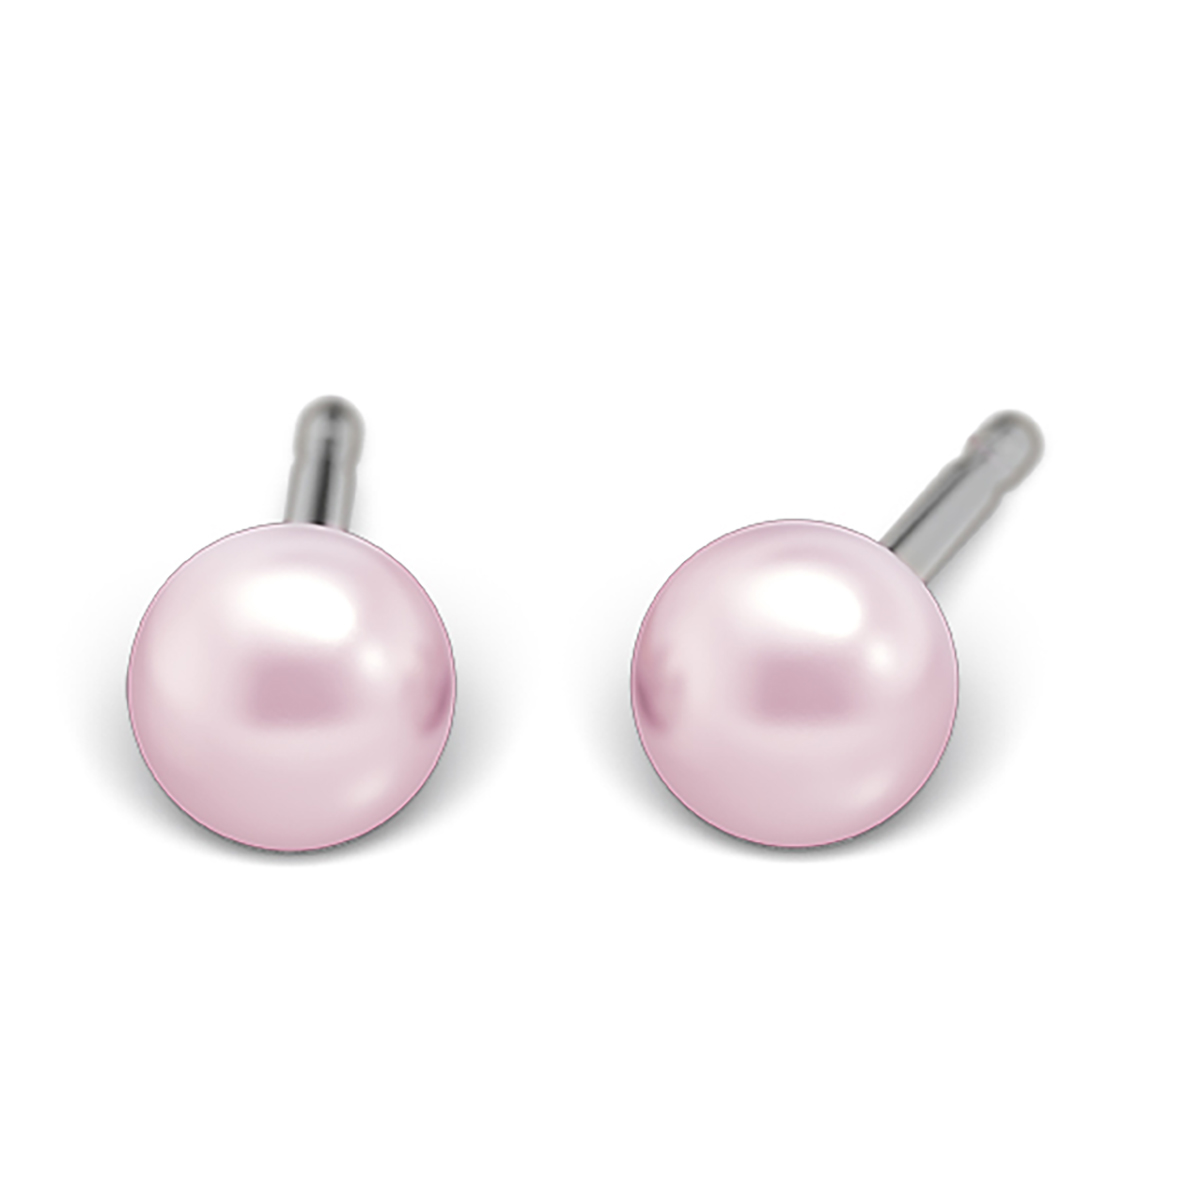 System 75 ear studs, 14 ct yellow gold white rhodium plated